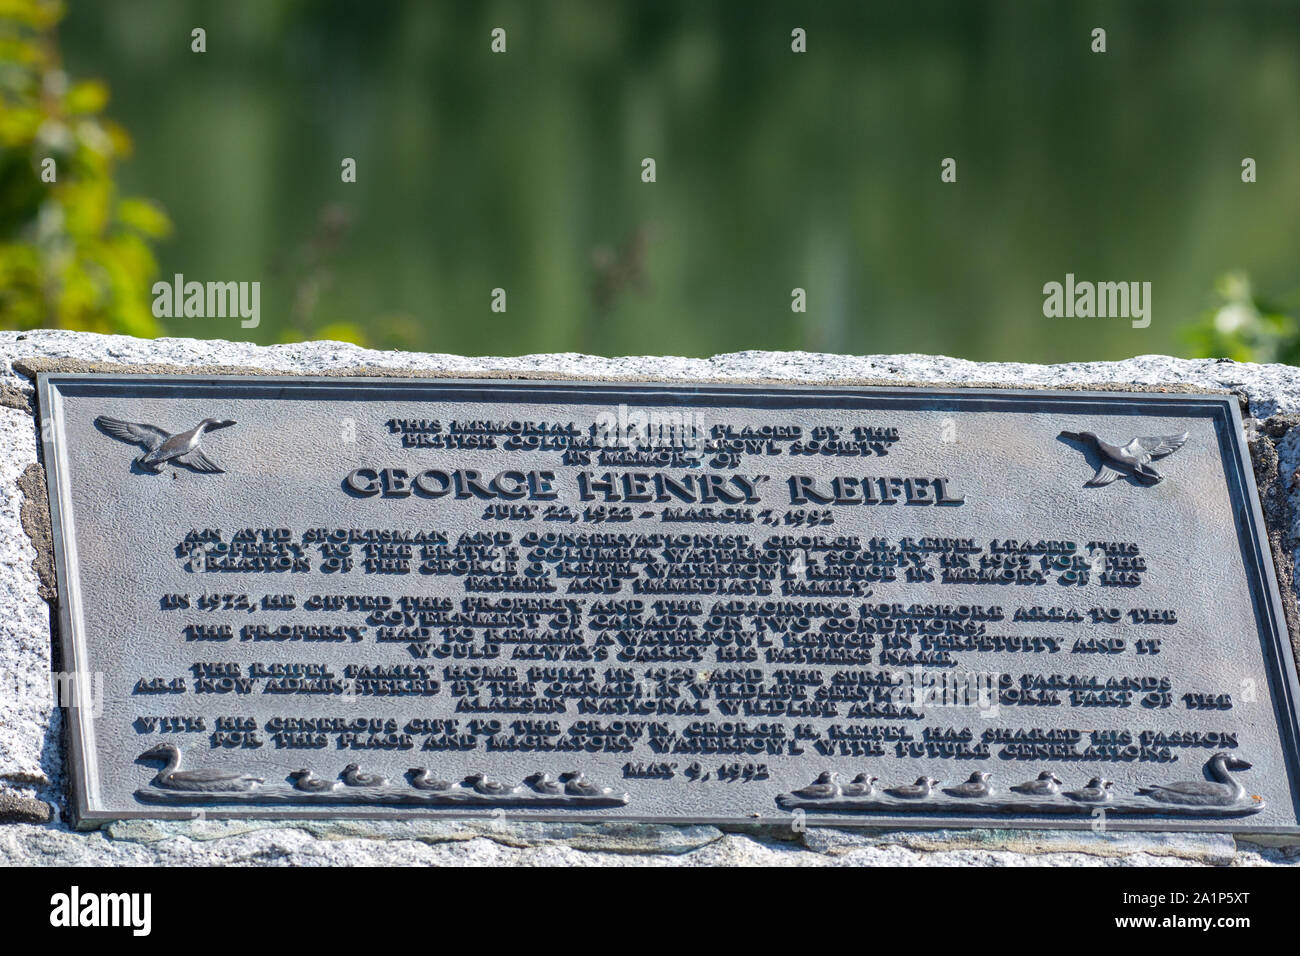 'Ladner, British Columbia/Canada - 7/25/2019: George Henry Reifel plaque in remembrance of donated land for birding santuary in Canada.' in remembranc Stock Photo